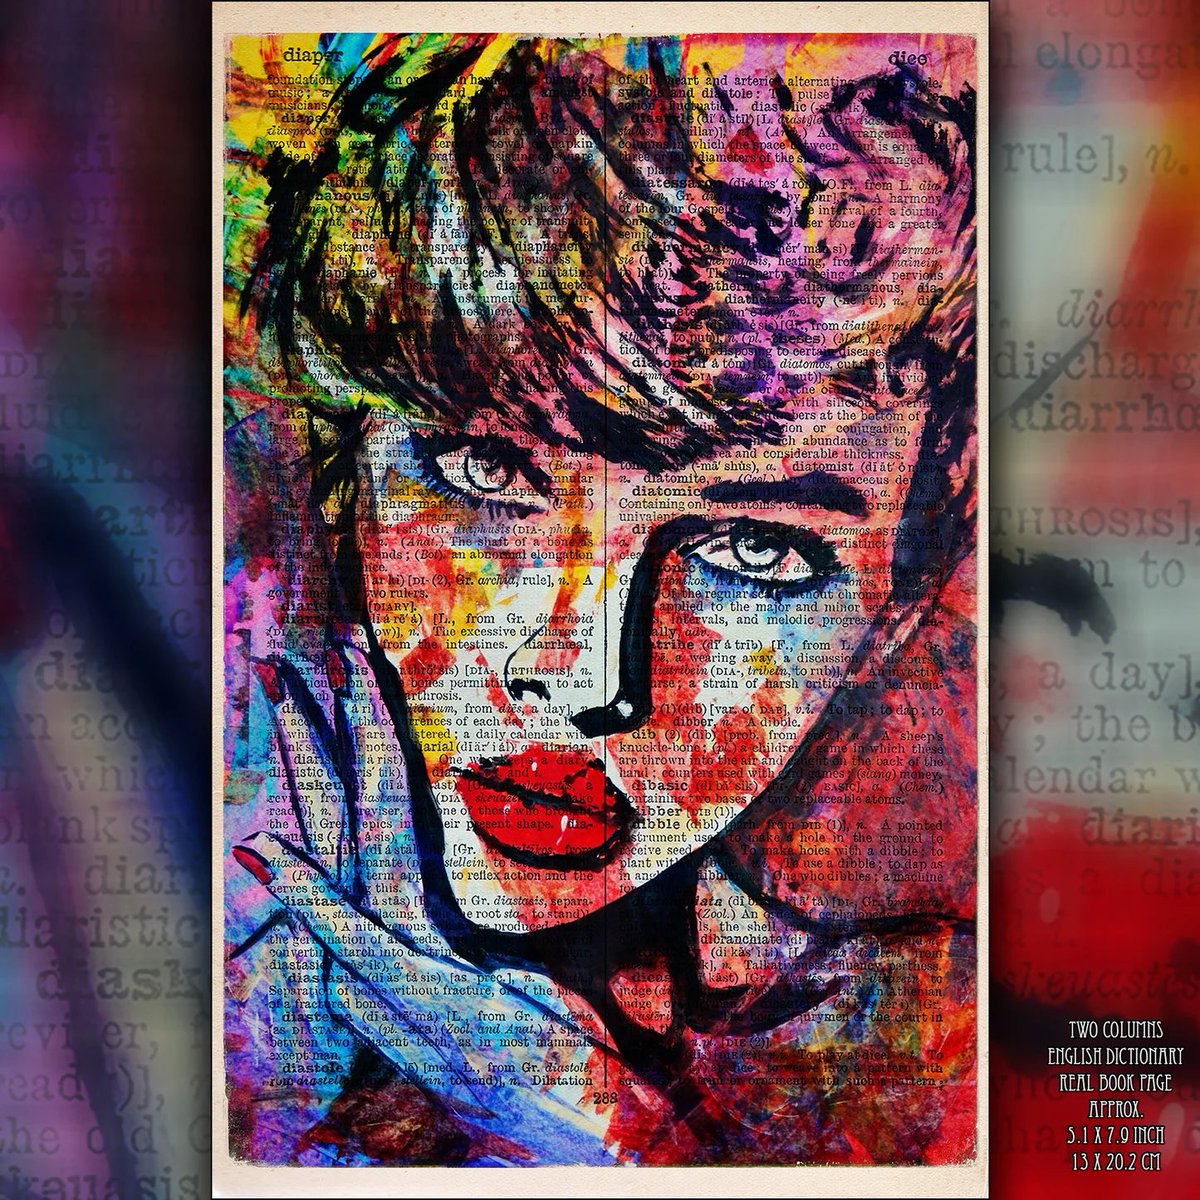 “'Call Me Love' is a stunning artistic portrait of a girl in an abstract style. ” artcursor.com/products/call-… 
#salesevent #decorativeart #bargainhunt #giftsforfriends #inspiringcreativity #artworkprints #discountshopping #homedecor #creativeideas #artworkgallery